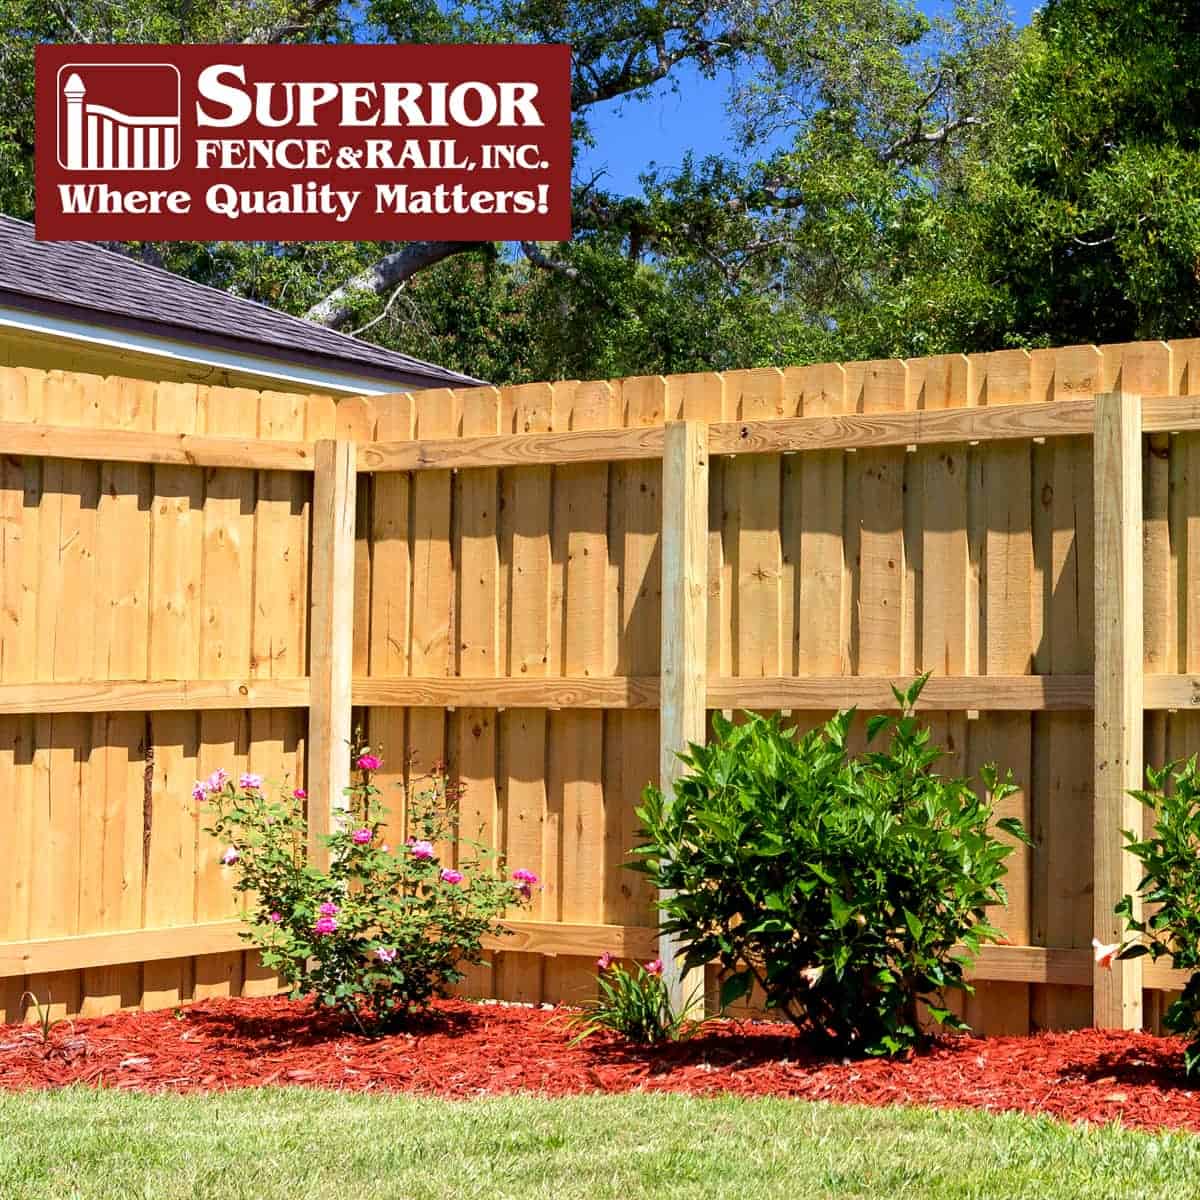 Signal Hill fence company contractor